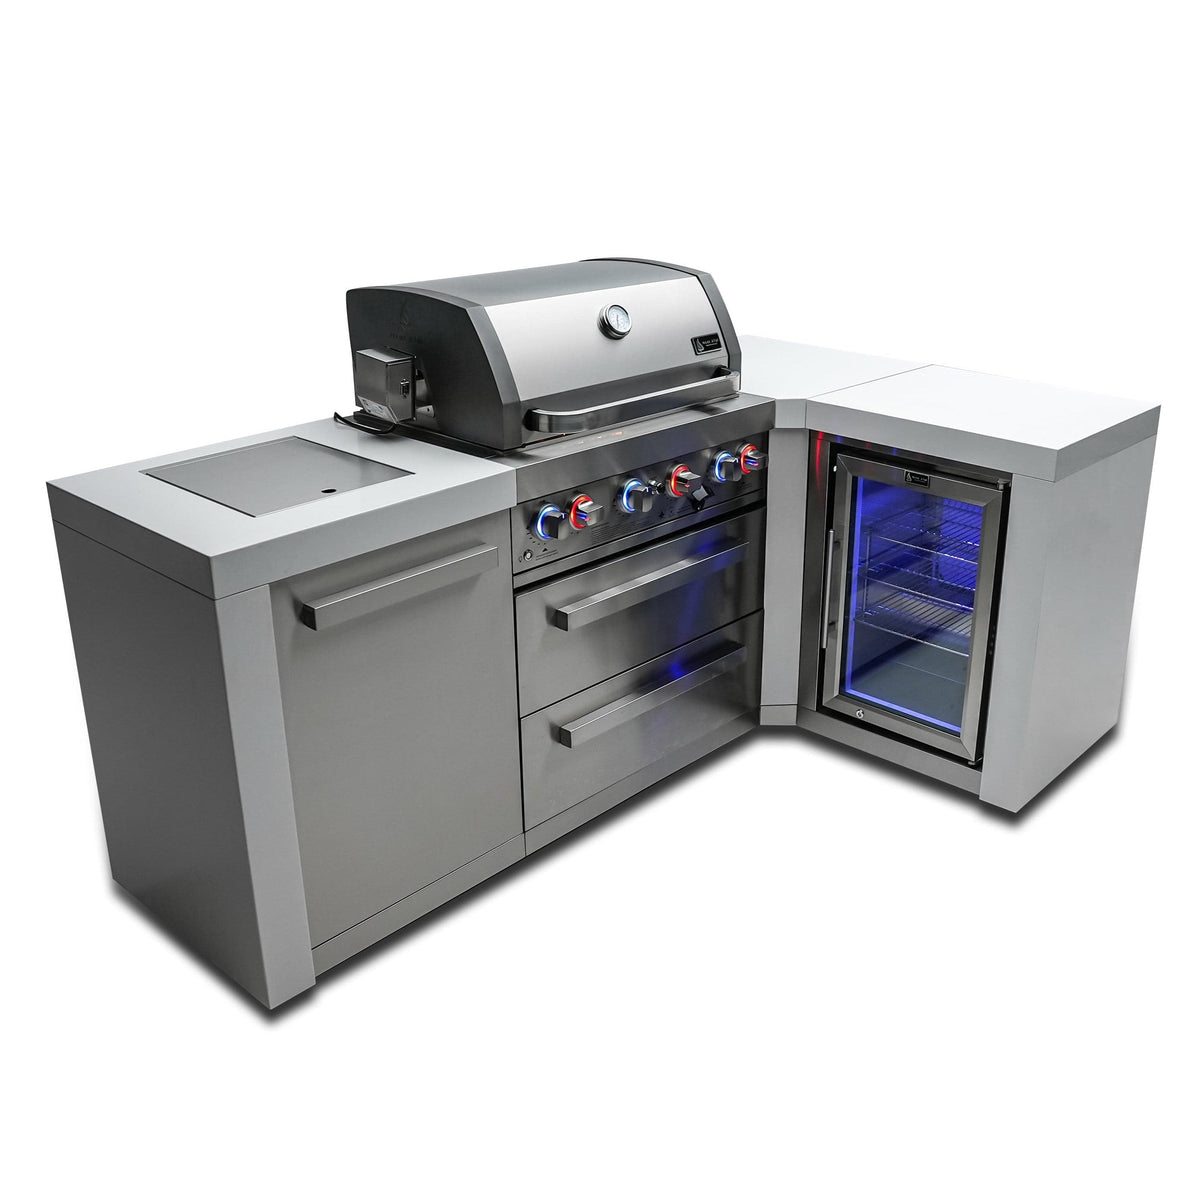 Mont Alpi Islands Mont Alpi 400 Deluxe Island with Fridge Cabinet and 90 Degree Corner / 4-Burner Grill, 2 Infrared Burners, Fridge, Stainless Steel / MAi400-D90FC